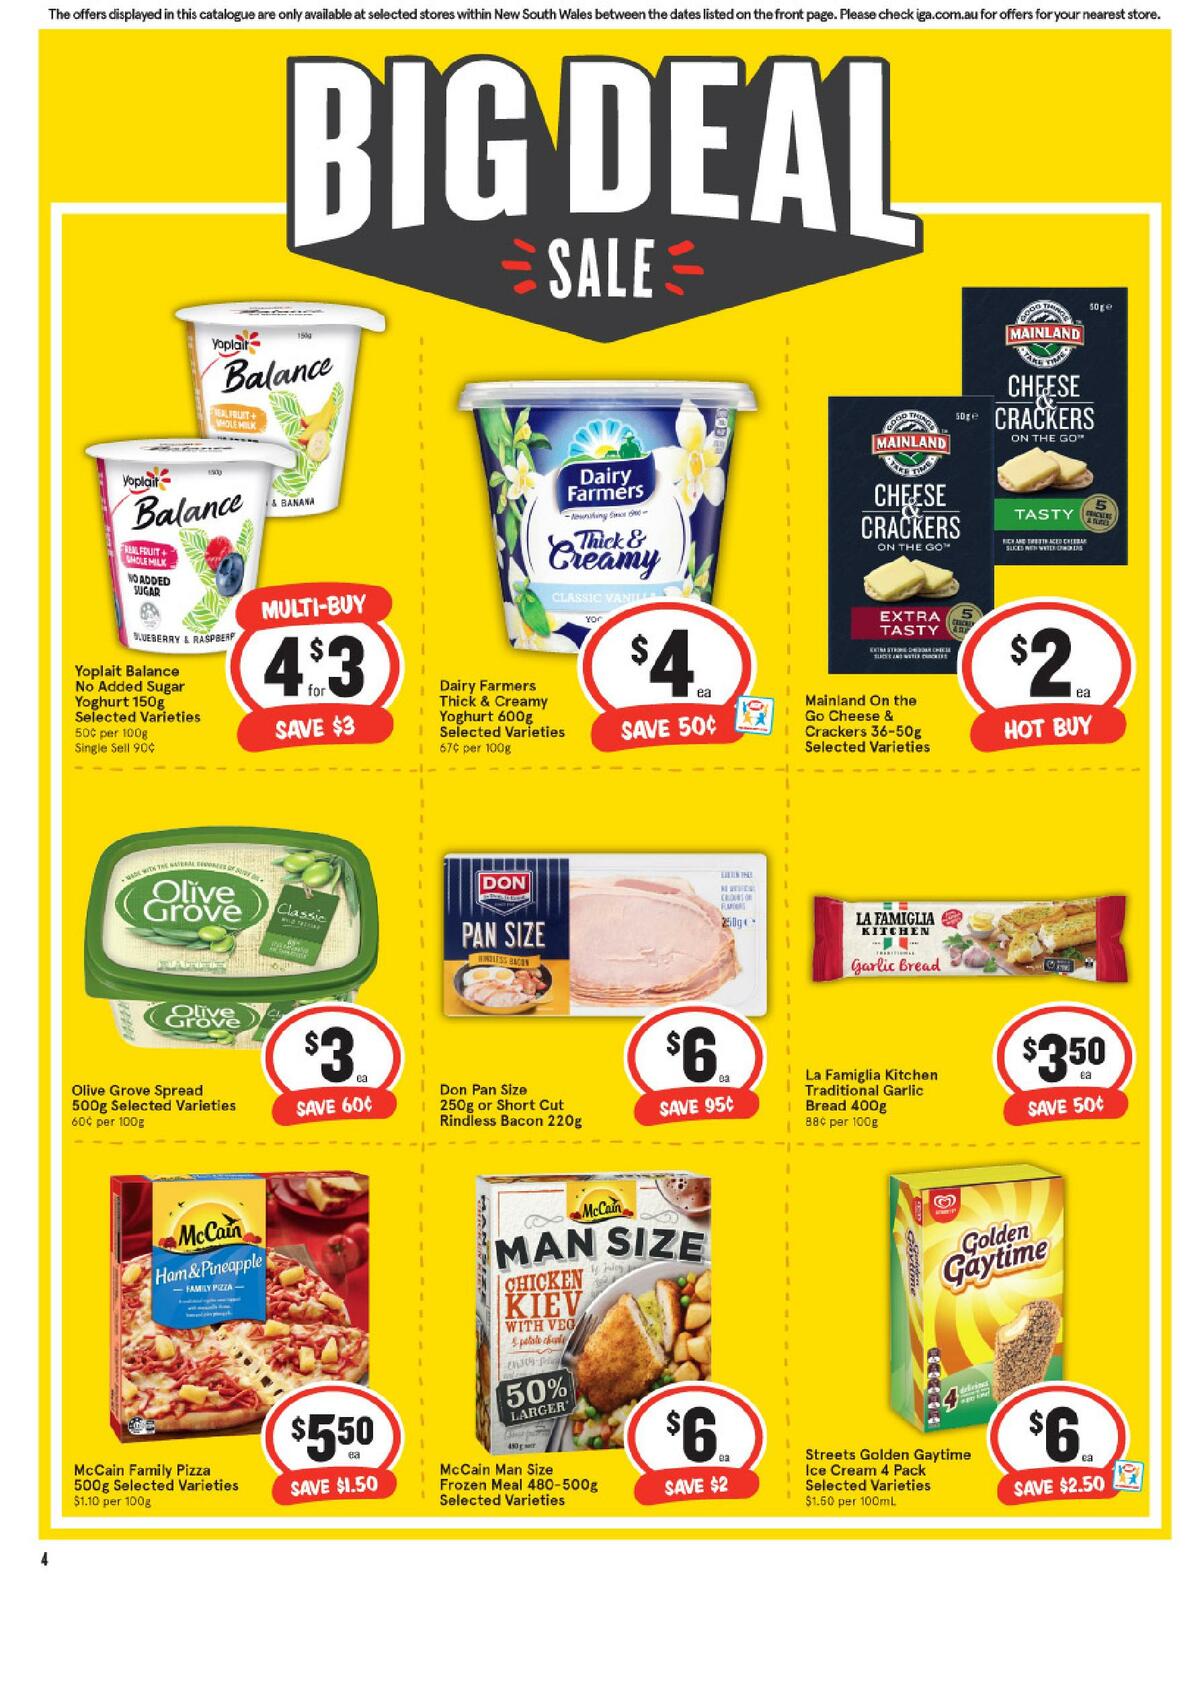 IGA Catalogues from 28 July